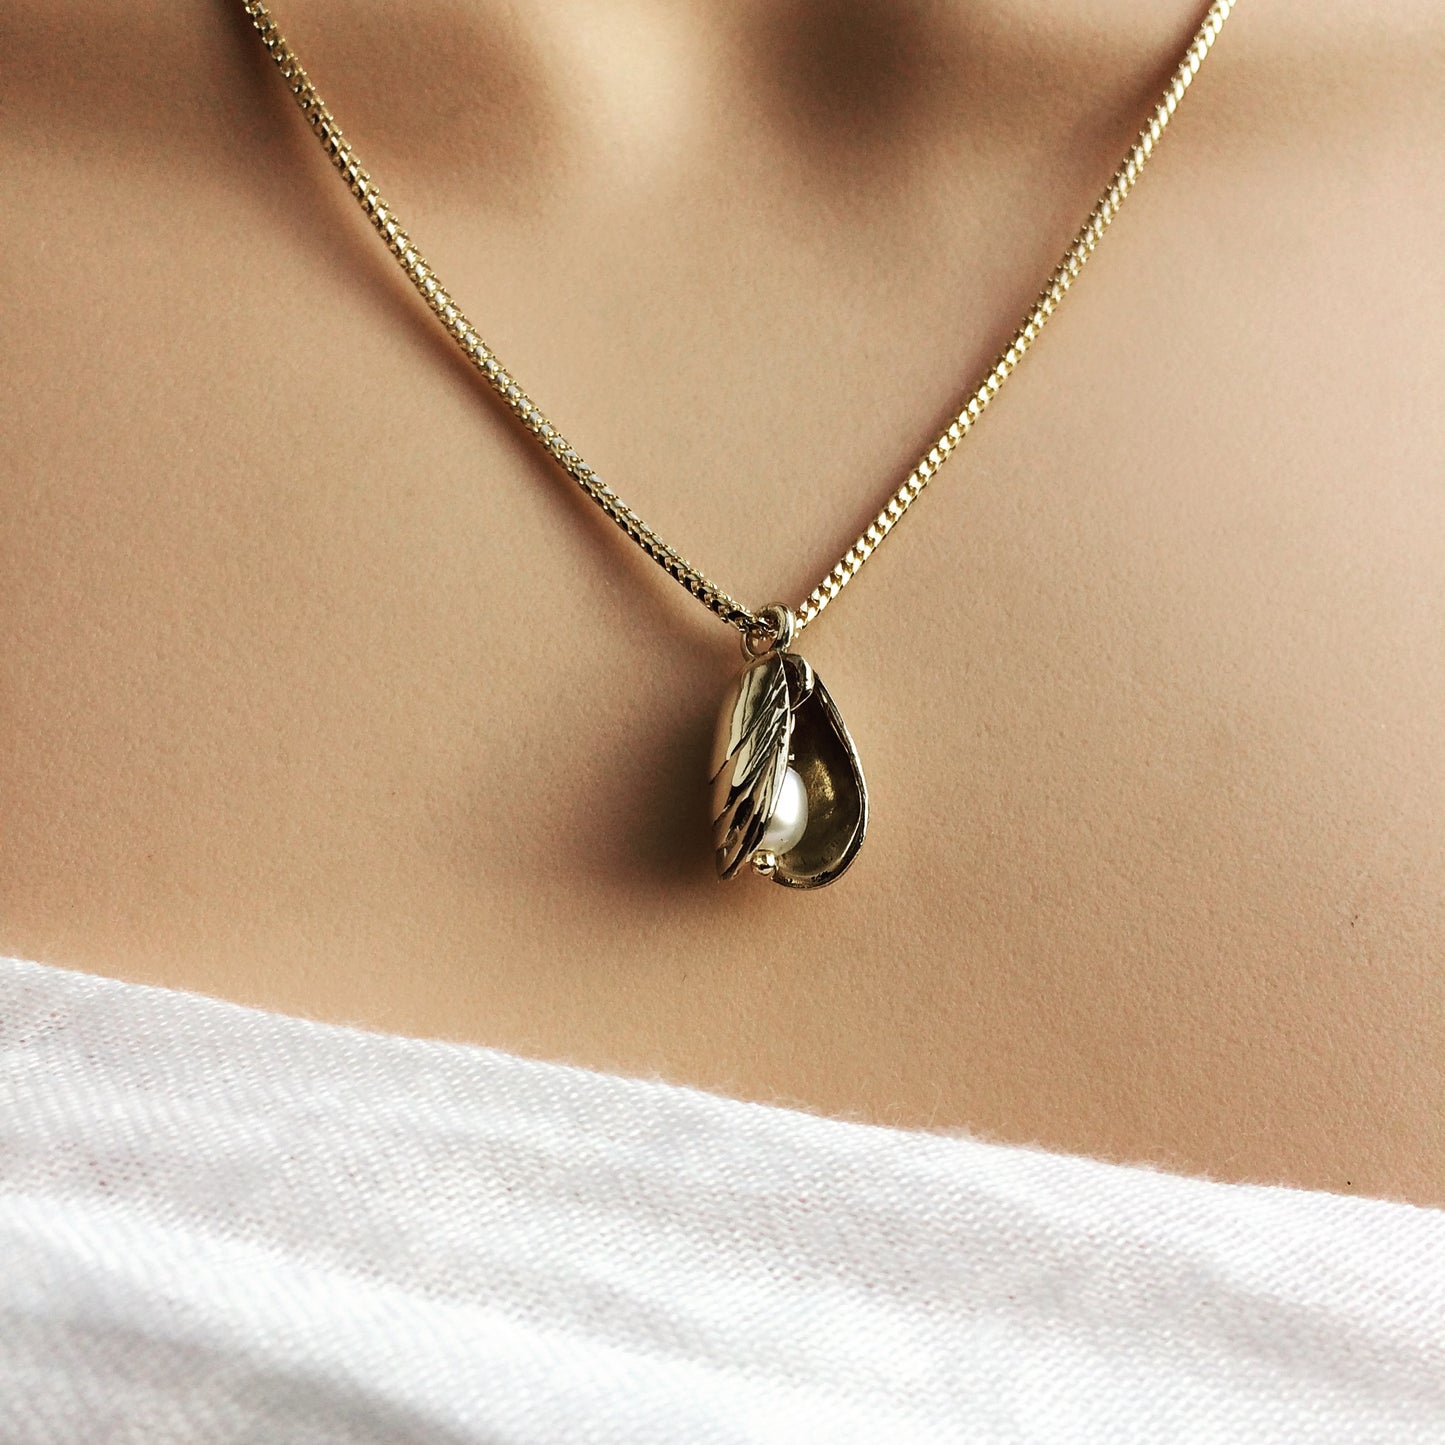 Baby mussel shell necklace with pearl